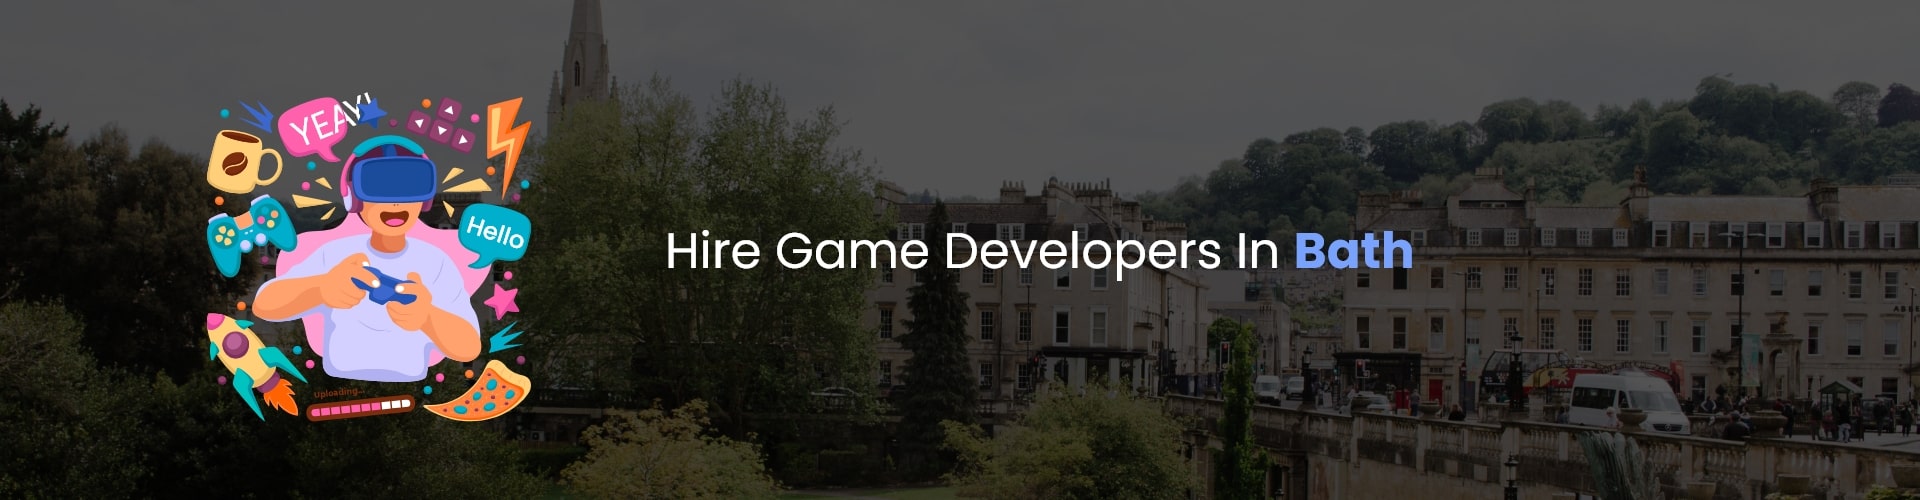 hire game developers in bath